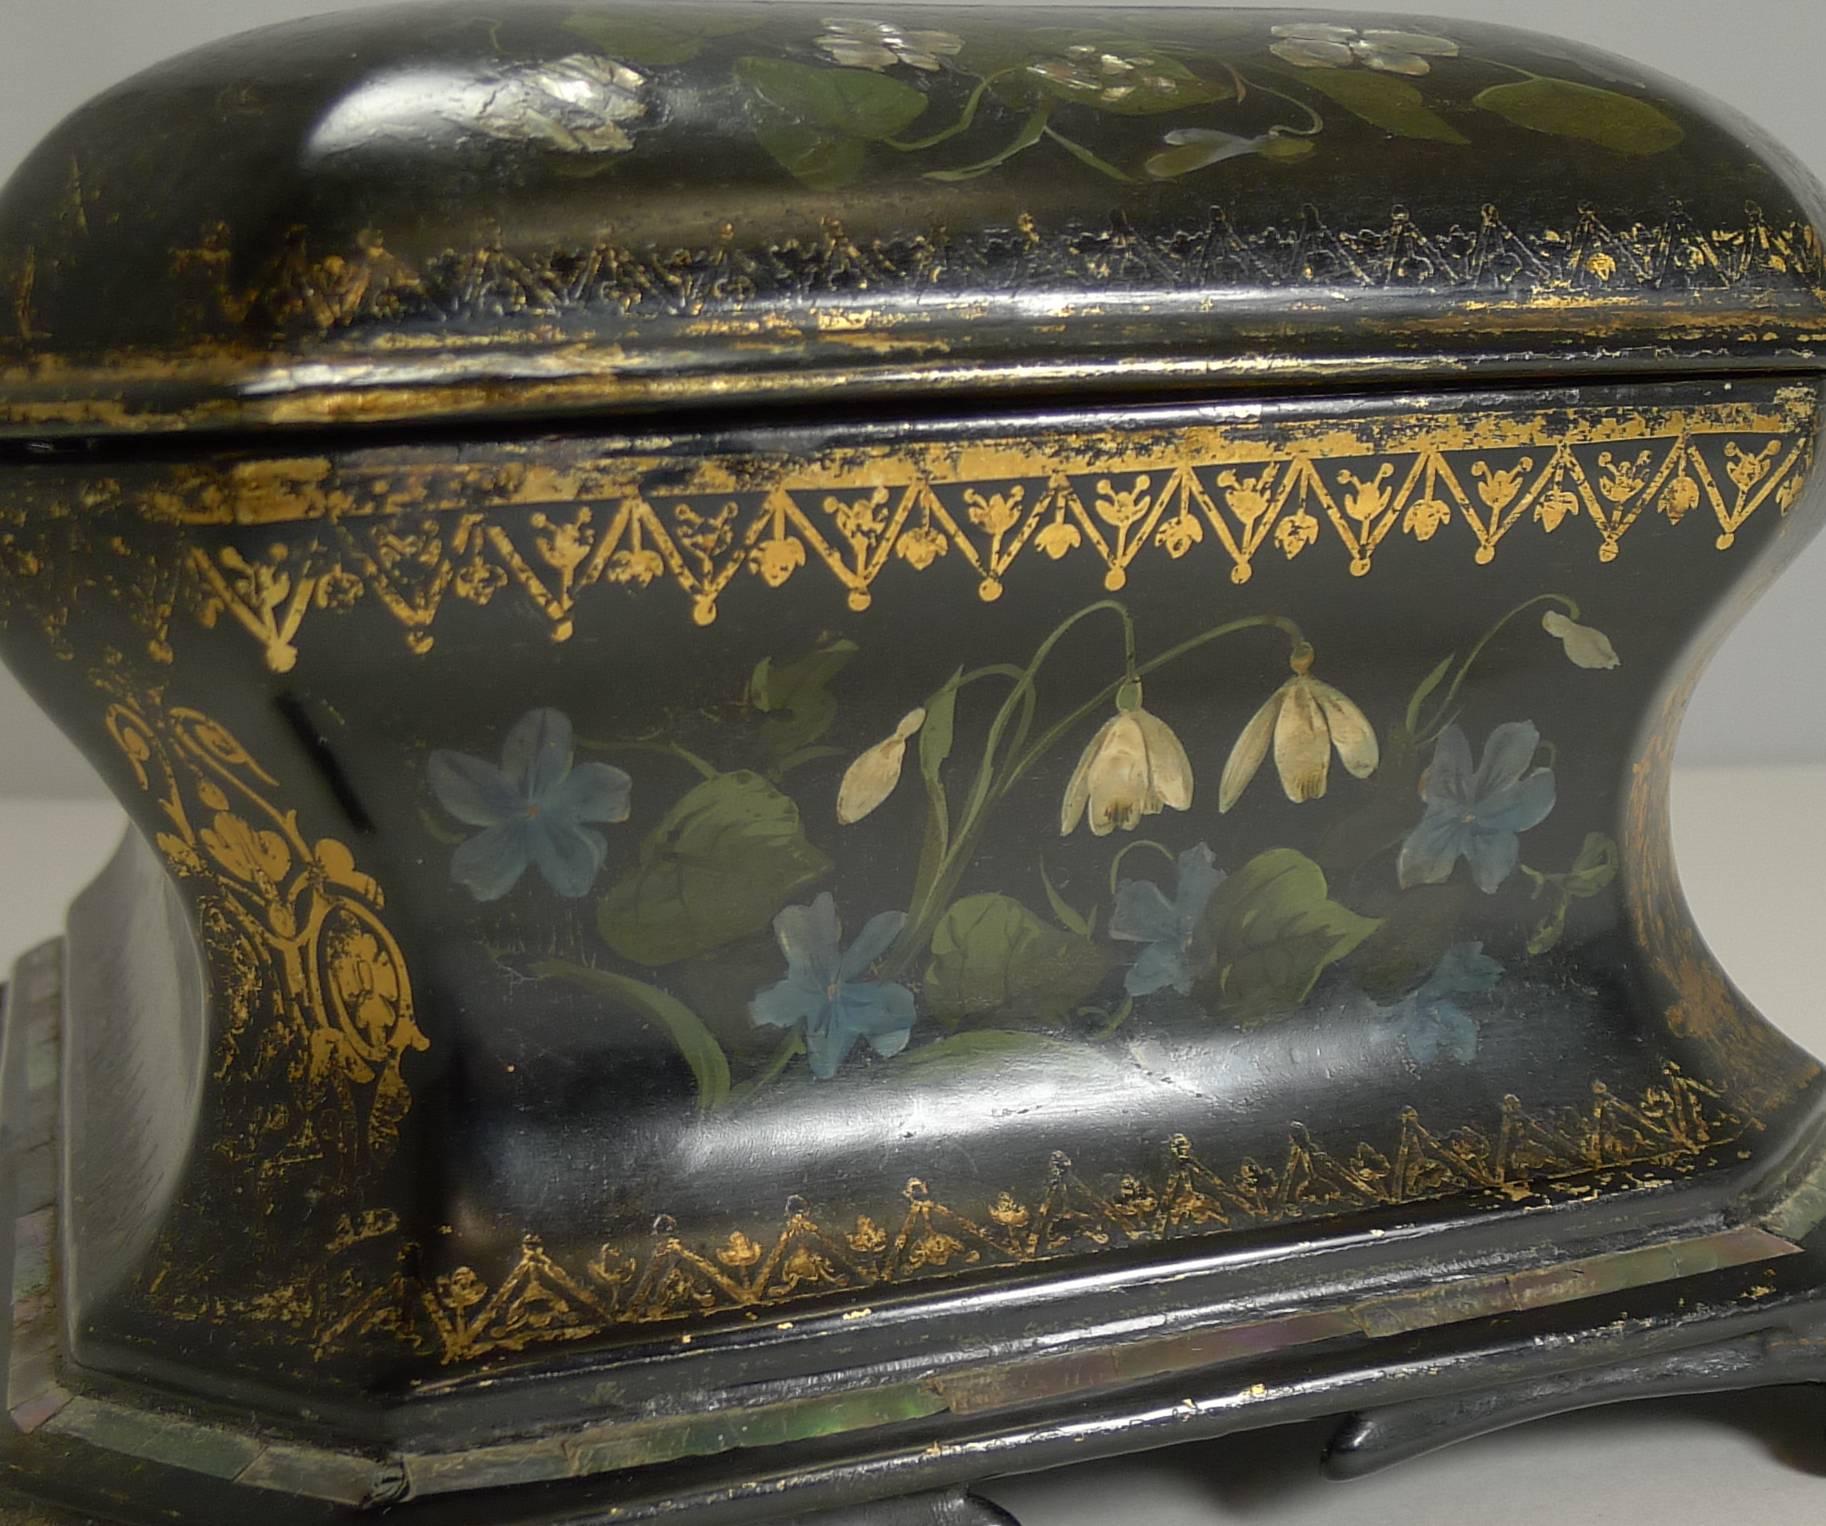 Late Victorian Exquisite Jennens & Bettridge Jewelry Box circa 1850, Girl and Dog Painting